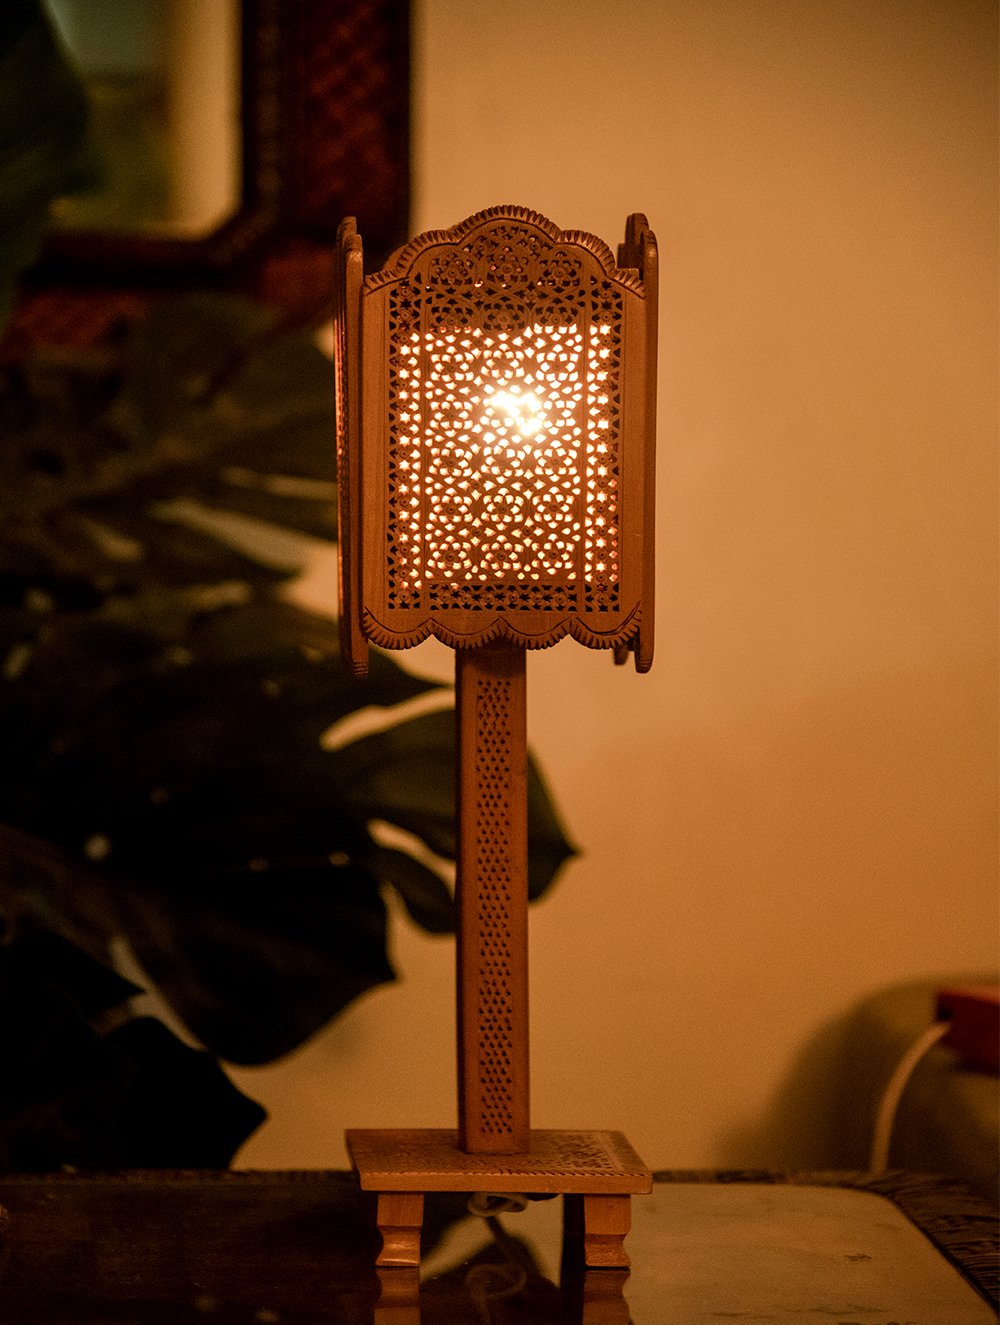 Load image into Gallery viewer, Handcrafted Jaaliwork Wooden Lamp (Large)